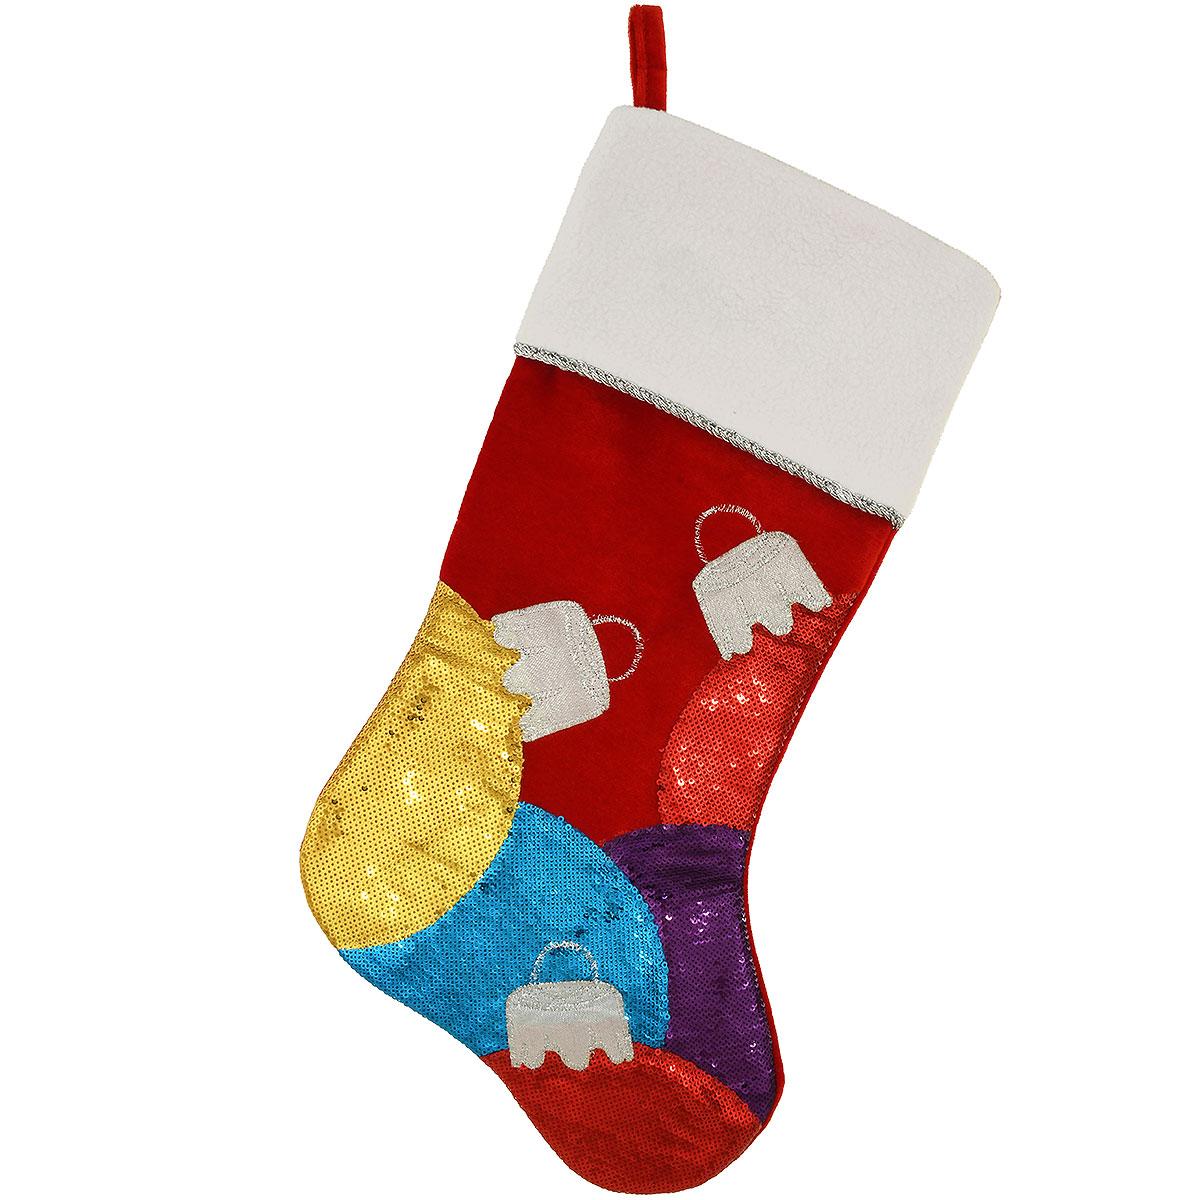 Sequins Ornament Stocking